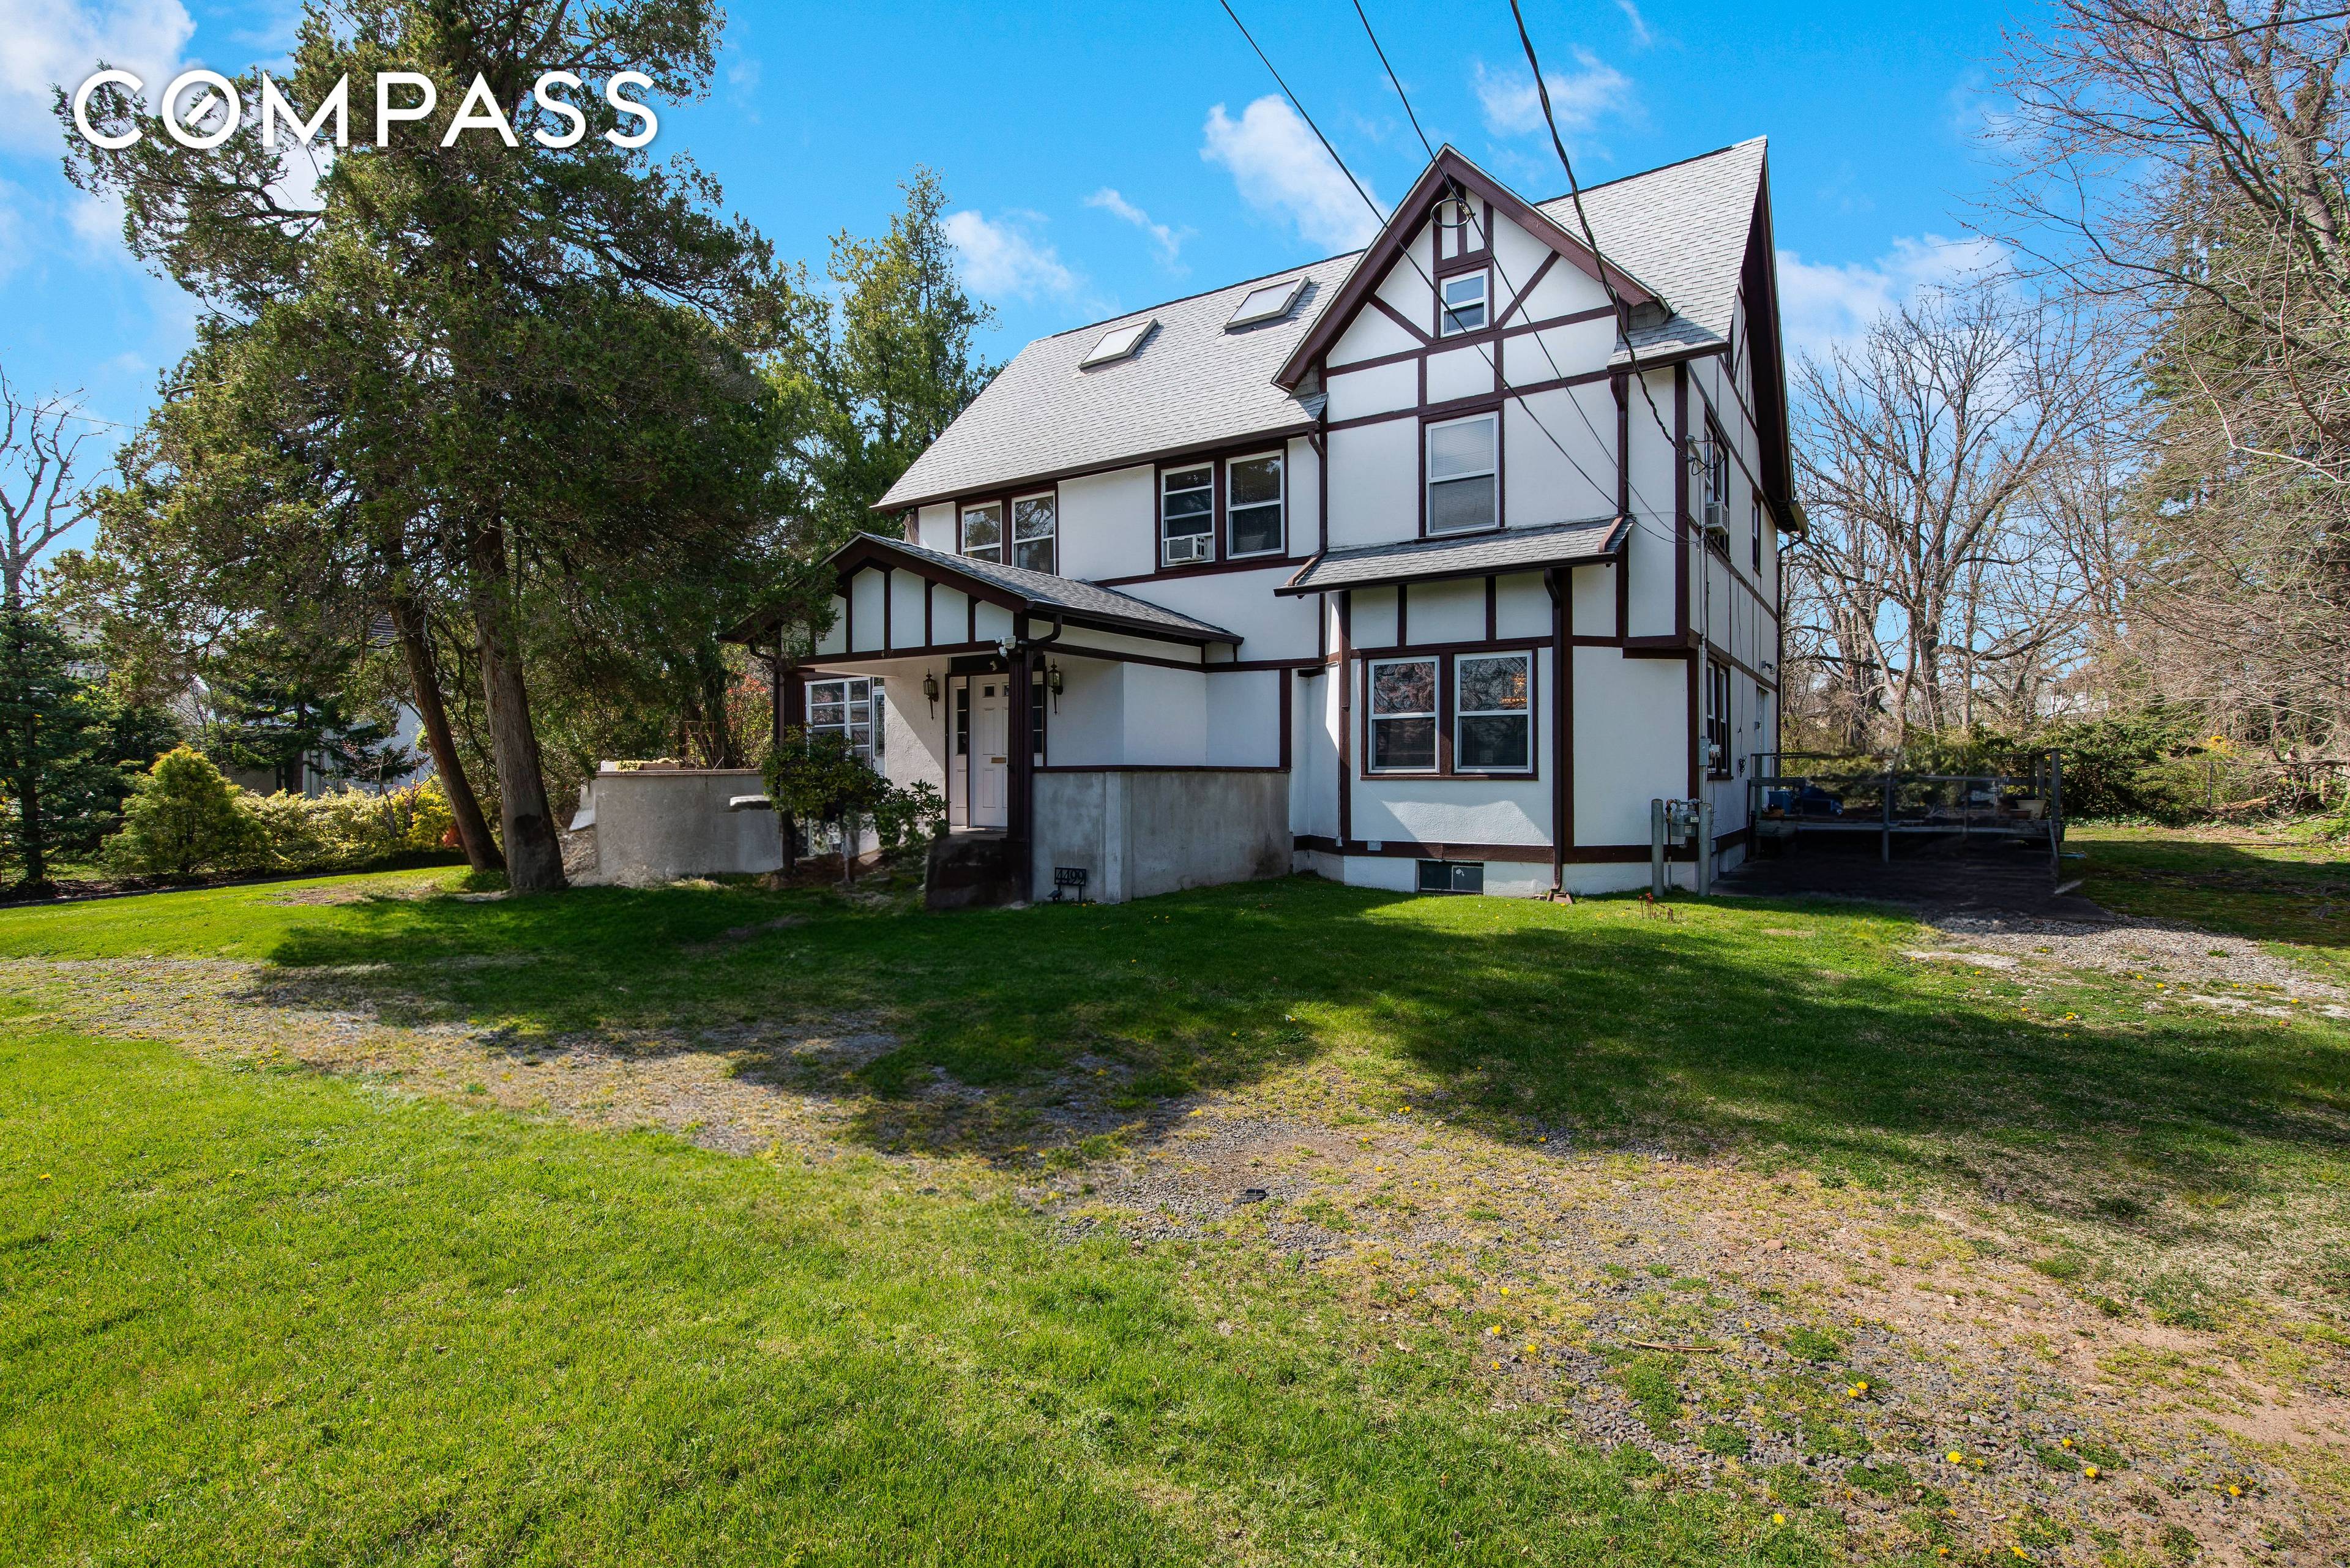 Welcome to this spacious Tudor home nestled in the Eltingville neighborhood of Staten Island.